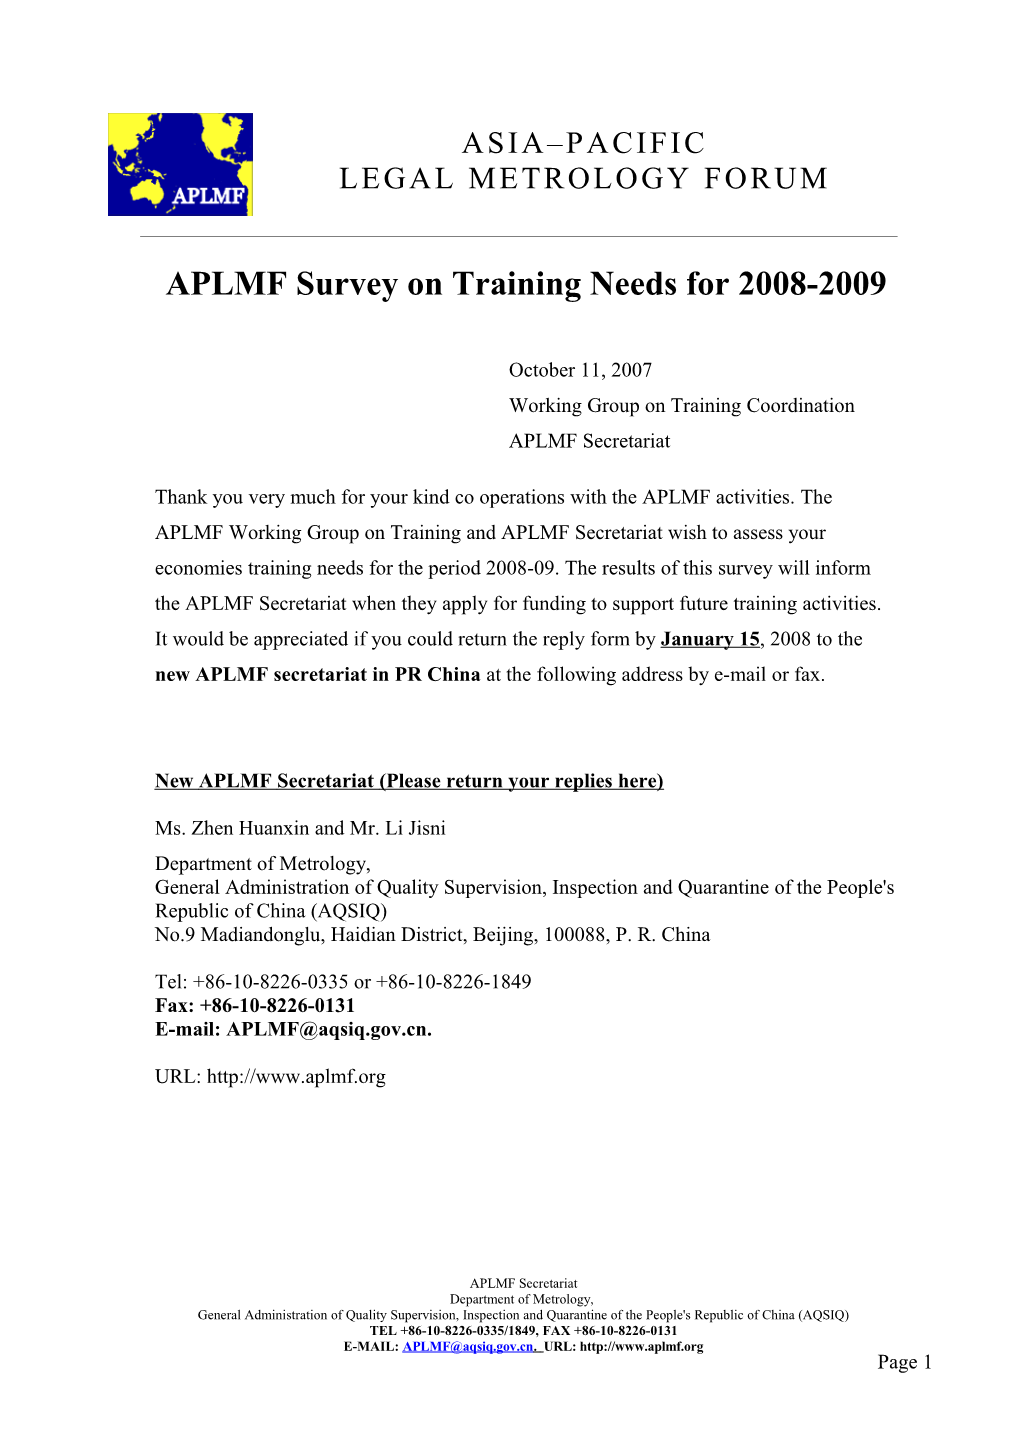 APLMF Survey on Training Needs for 2008-2009